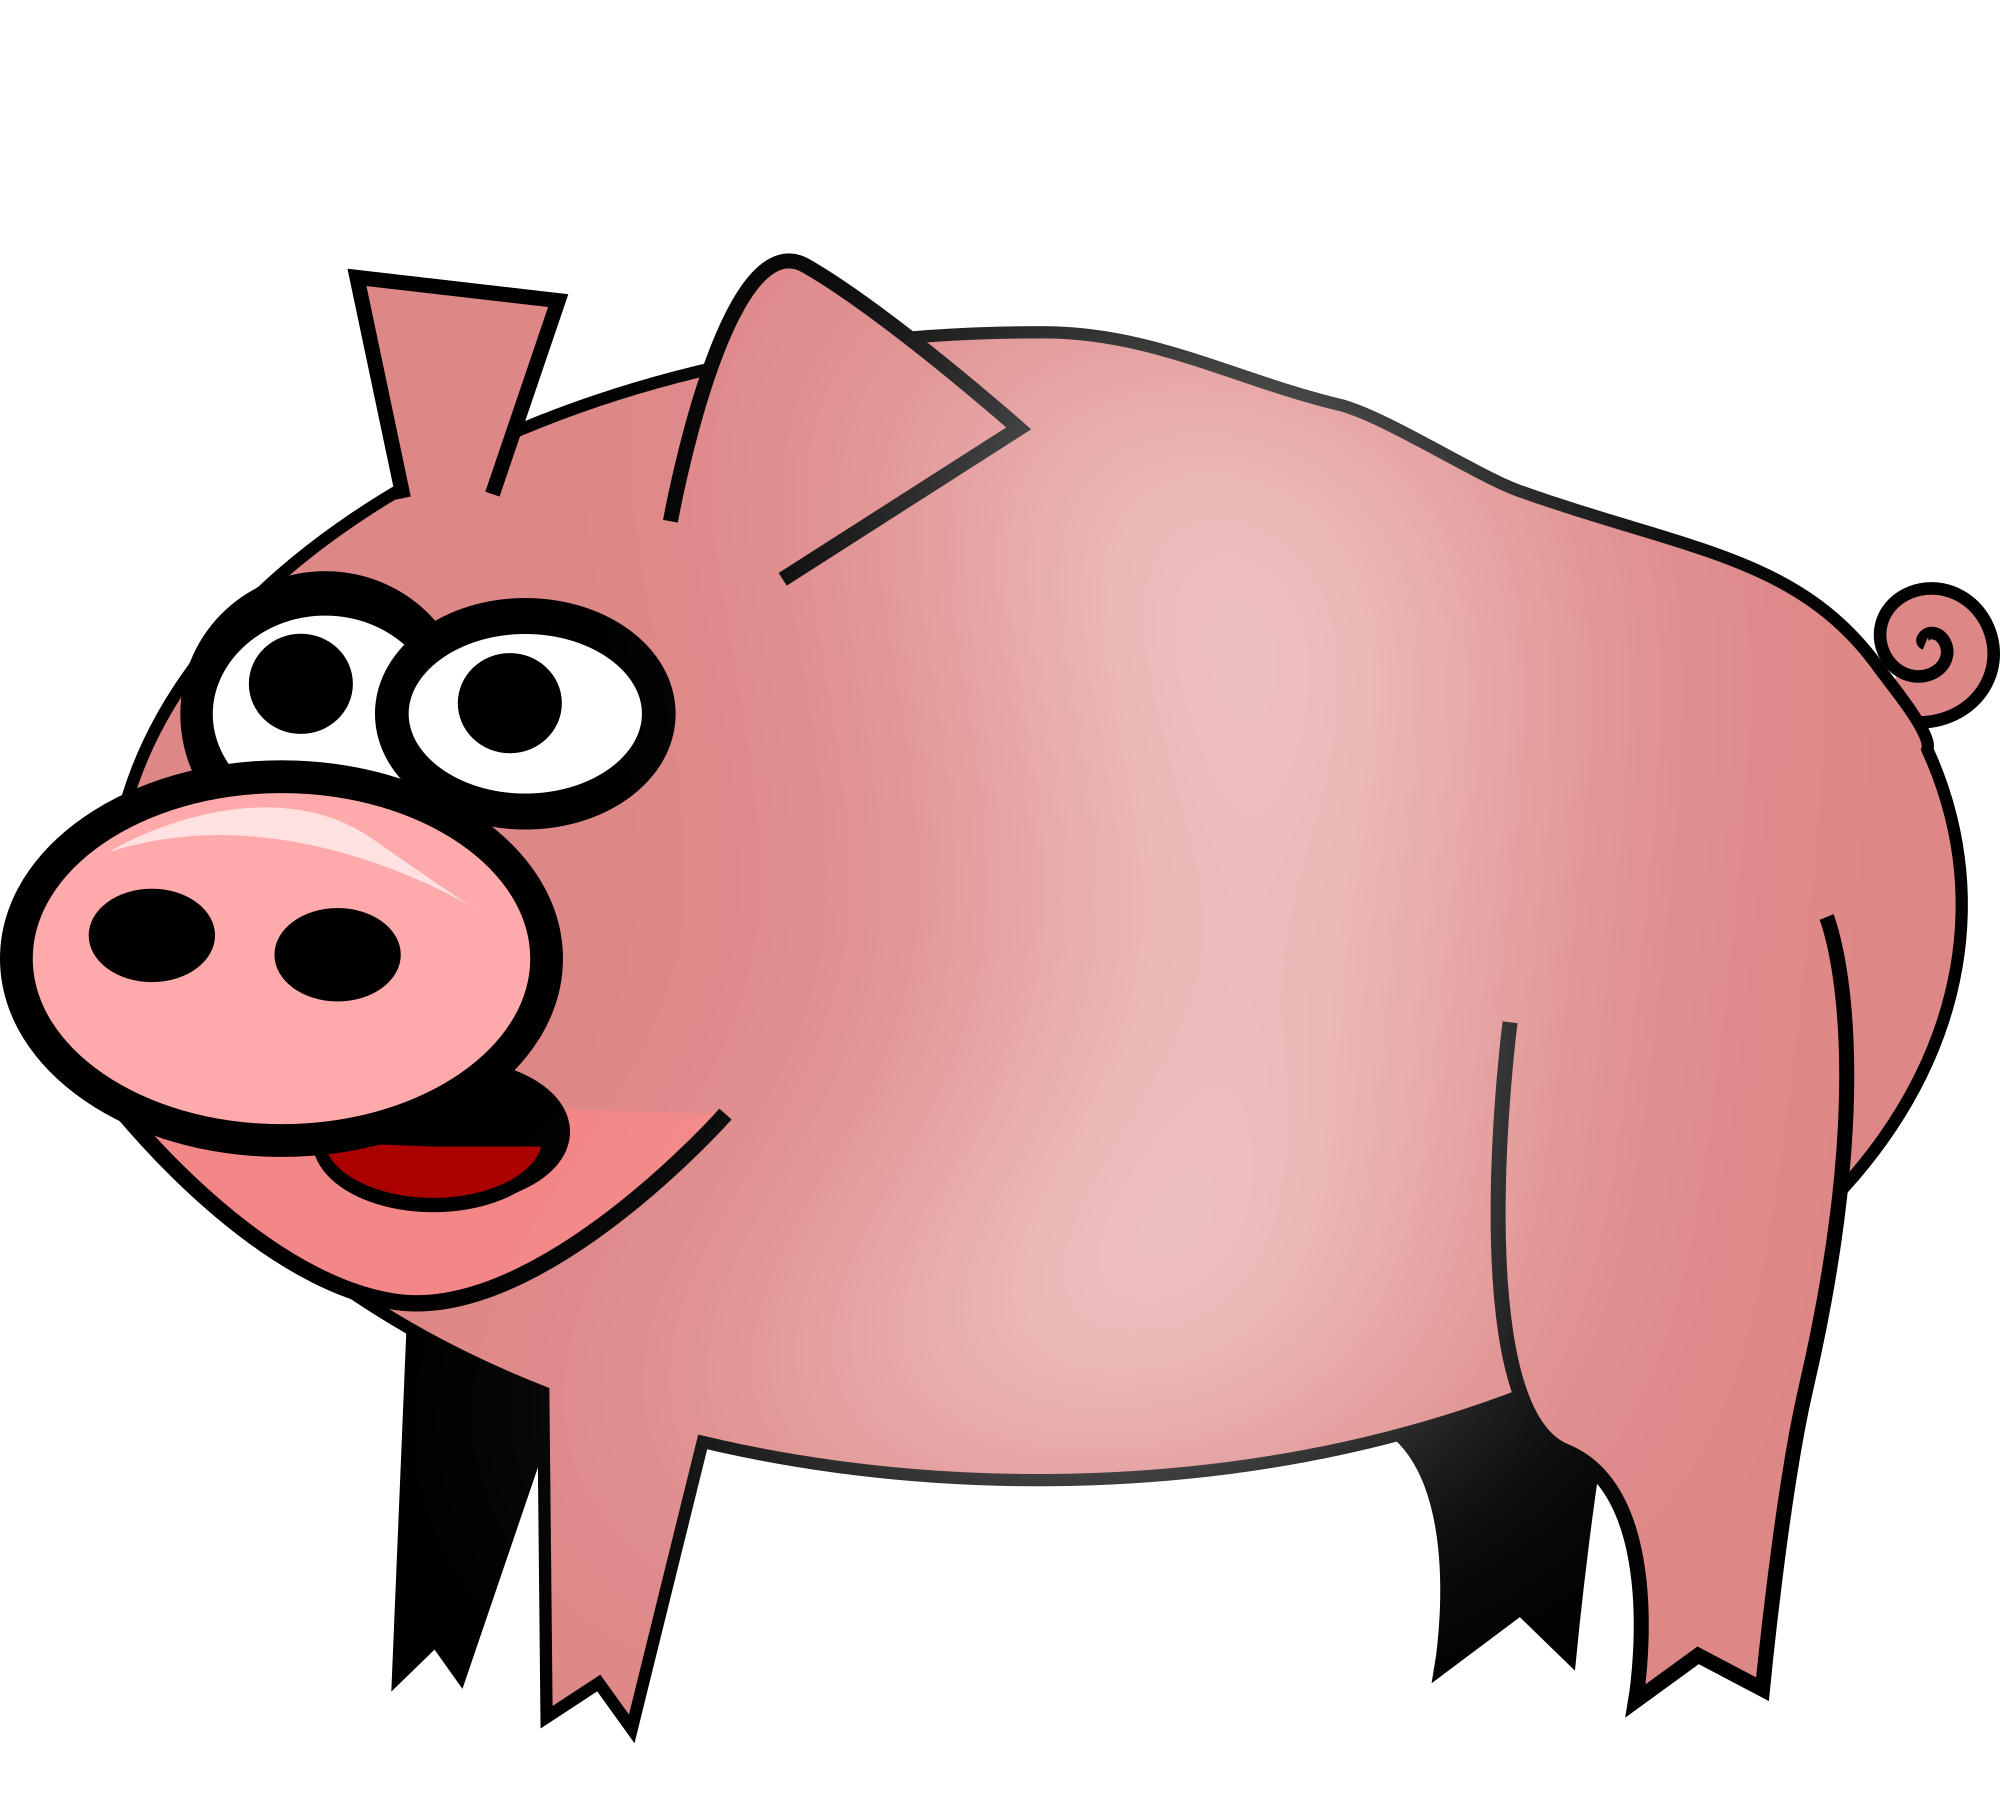 free vector pig clipart - photo #3